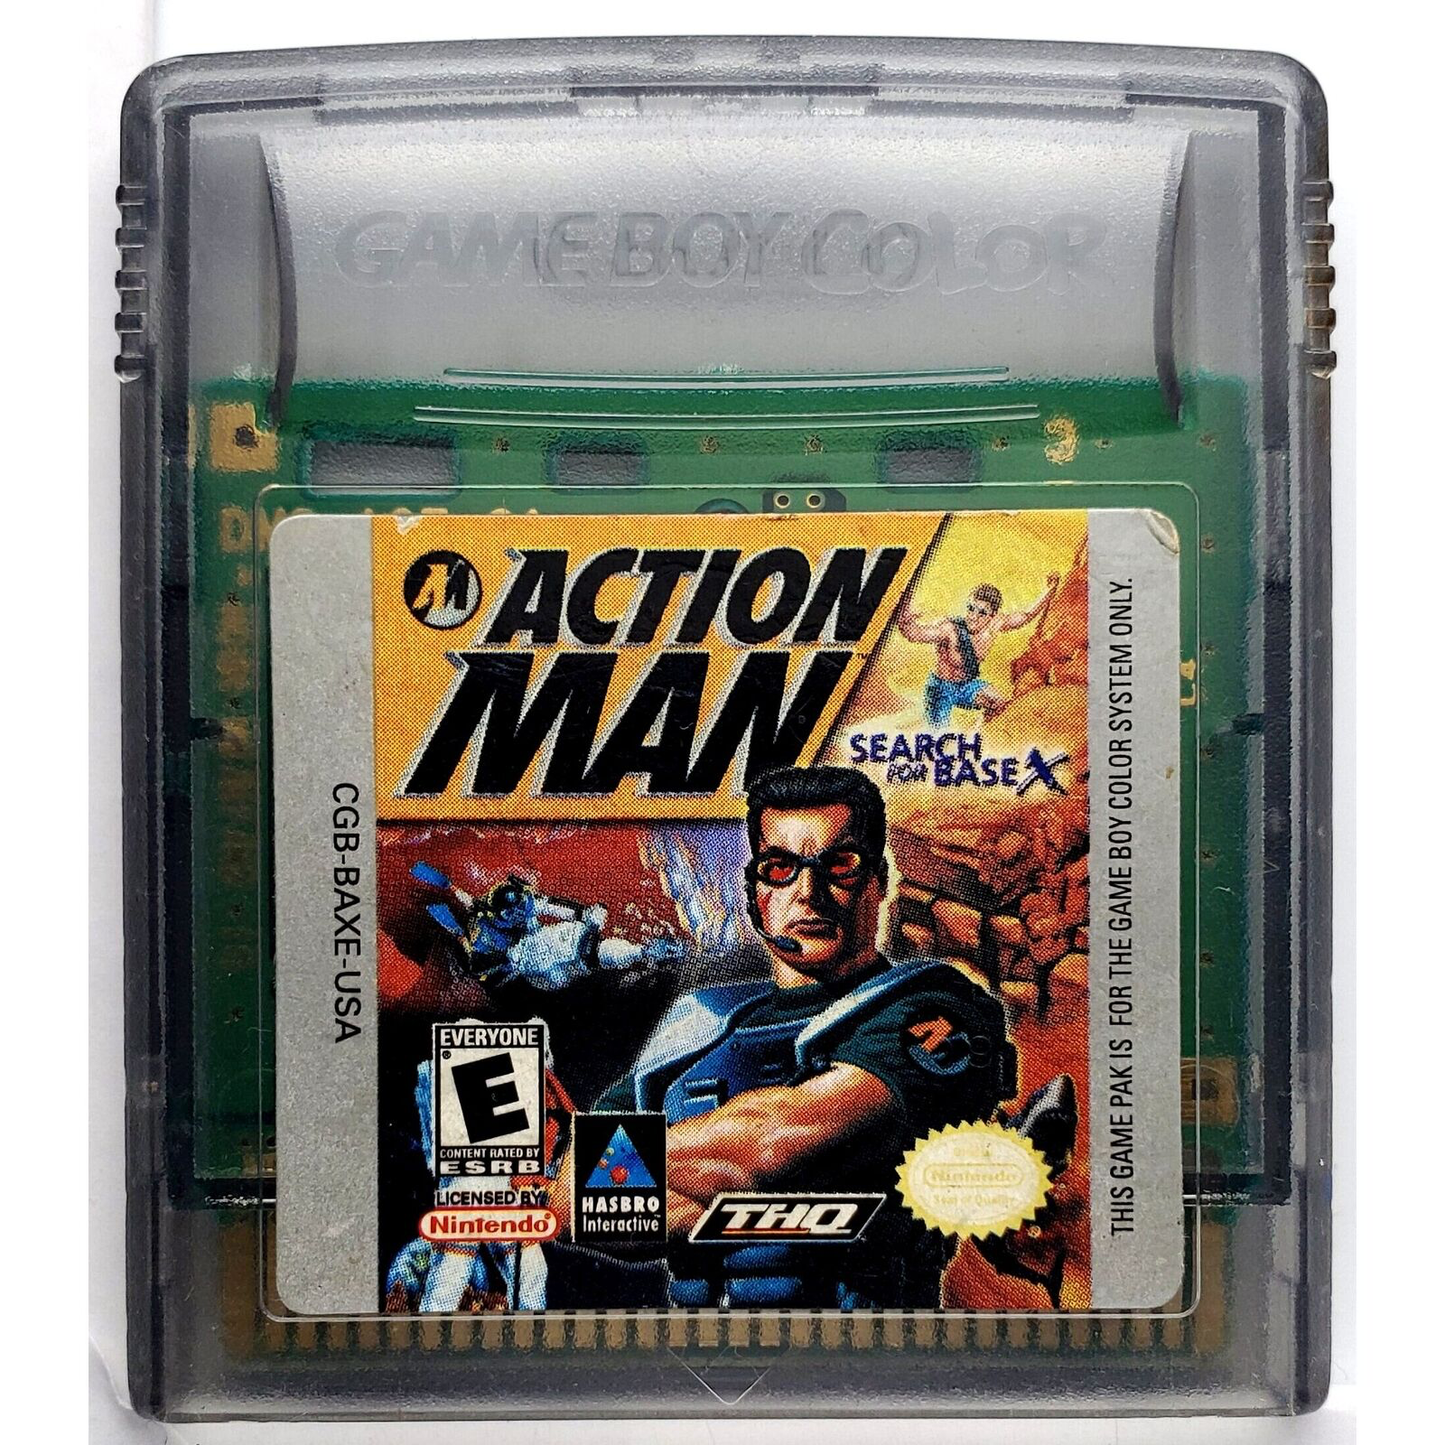 Action Man: Search For Base X - GBC